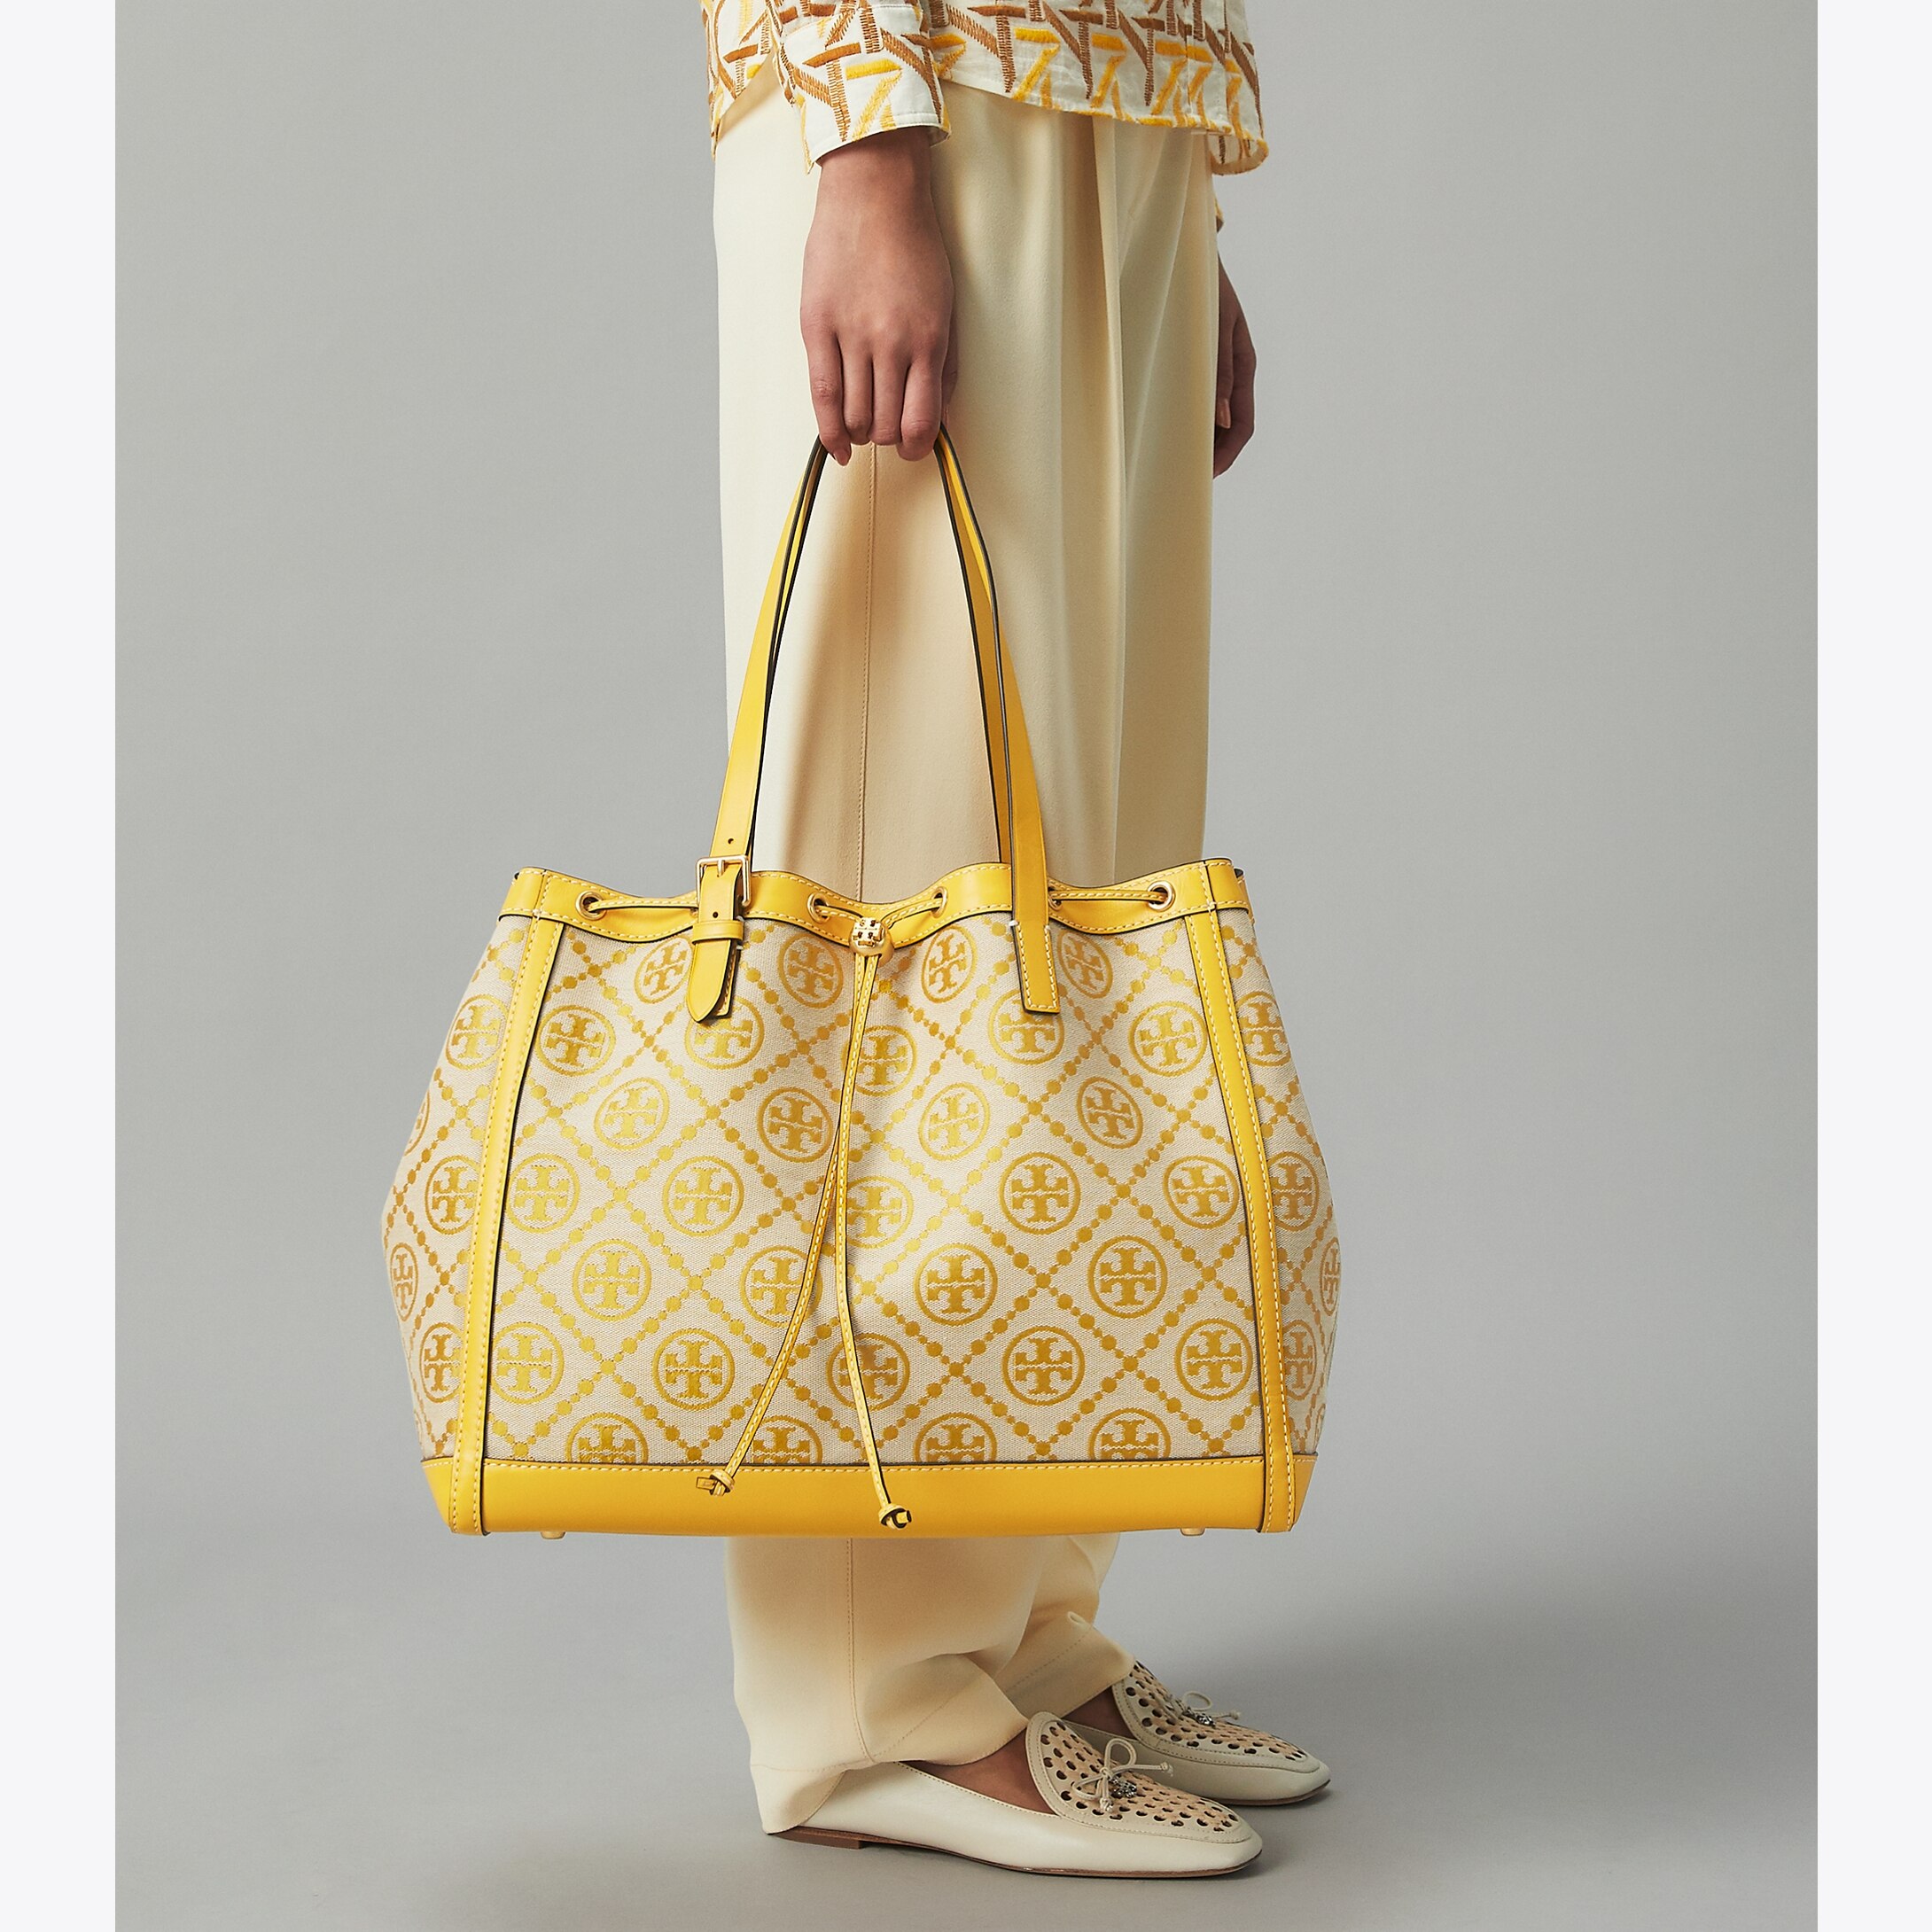 Tory Burch ,Canvas Basketweave Tote, yellow￼